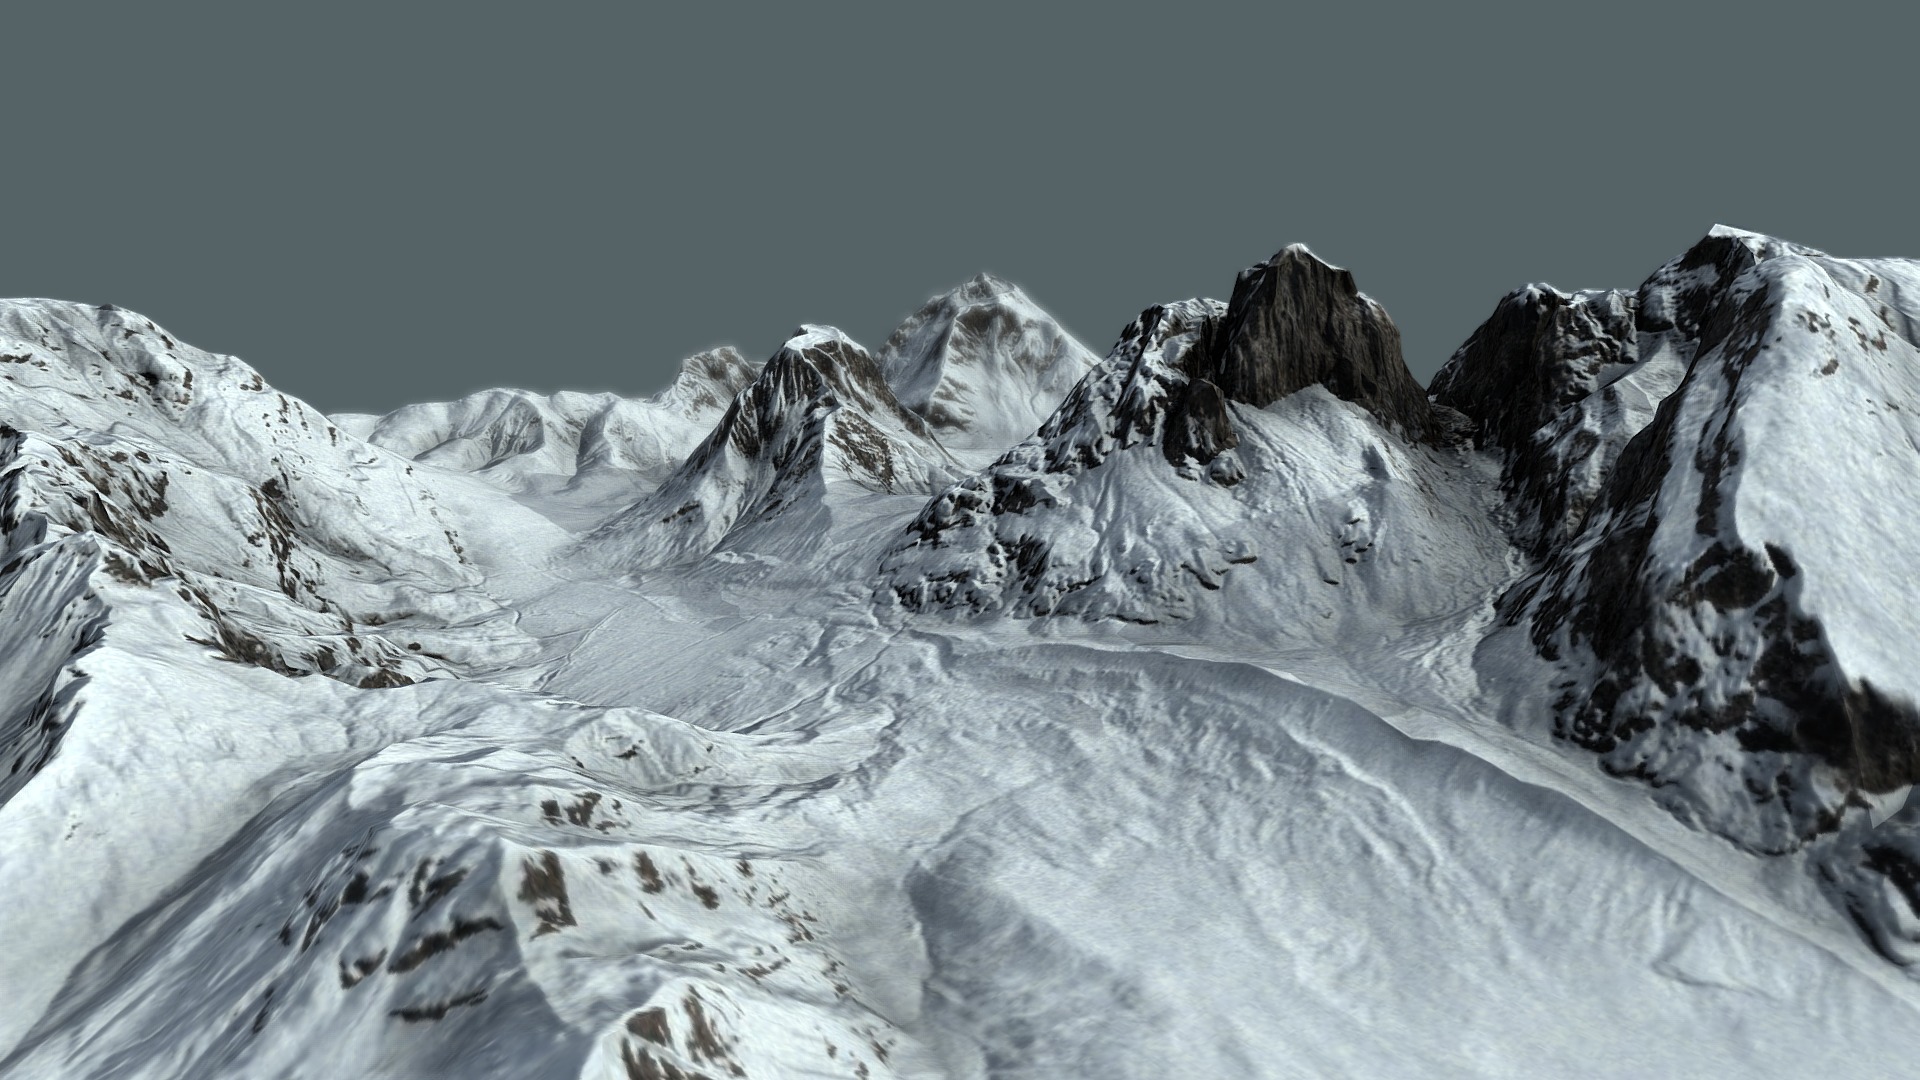 3D model Land of the Ice and Snow - This is a 3D model of the Land of the Ice and Snow. The 3D model is about a mountain range covered in snow.